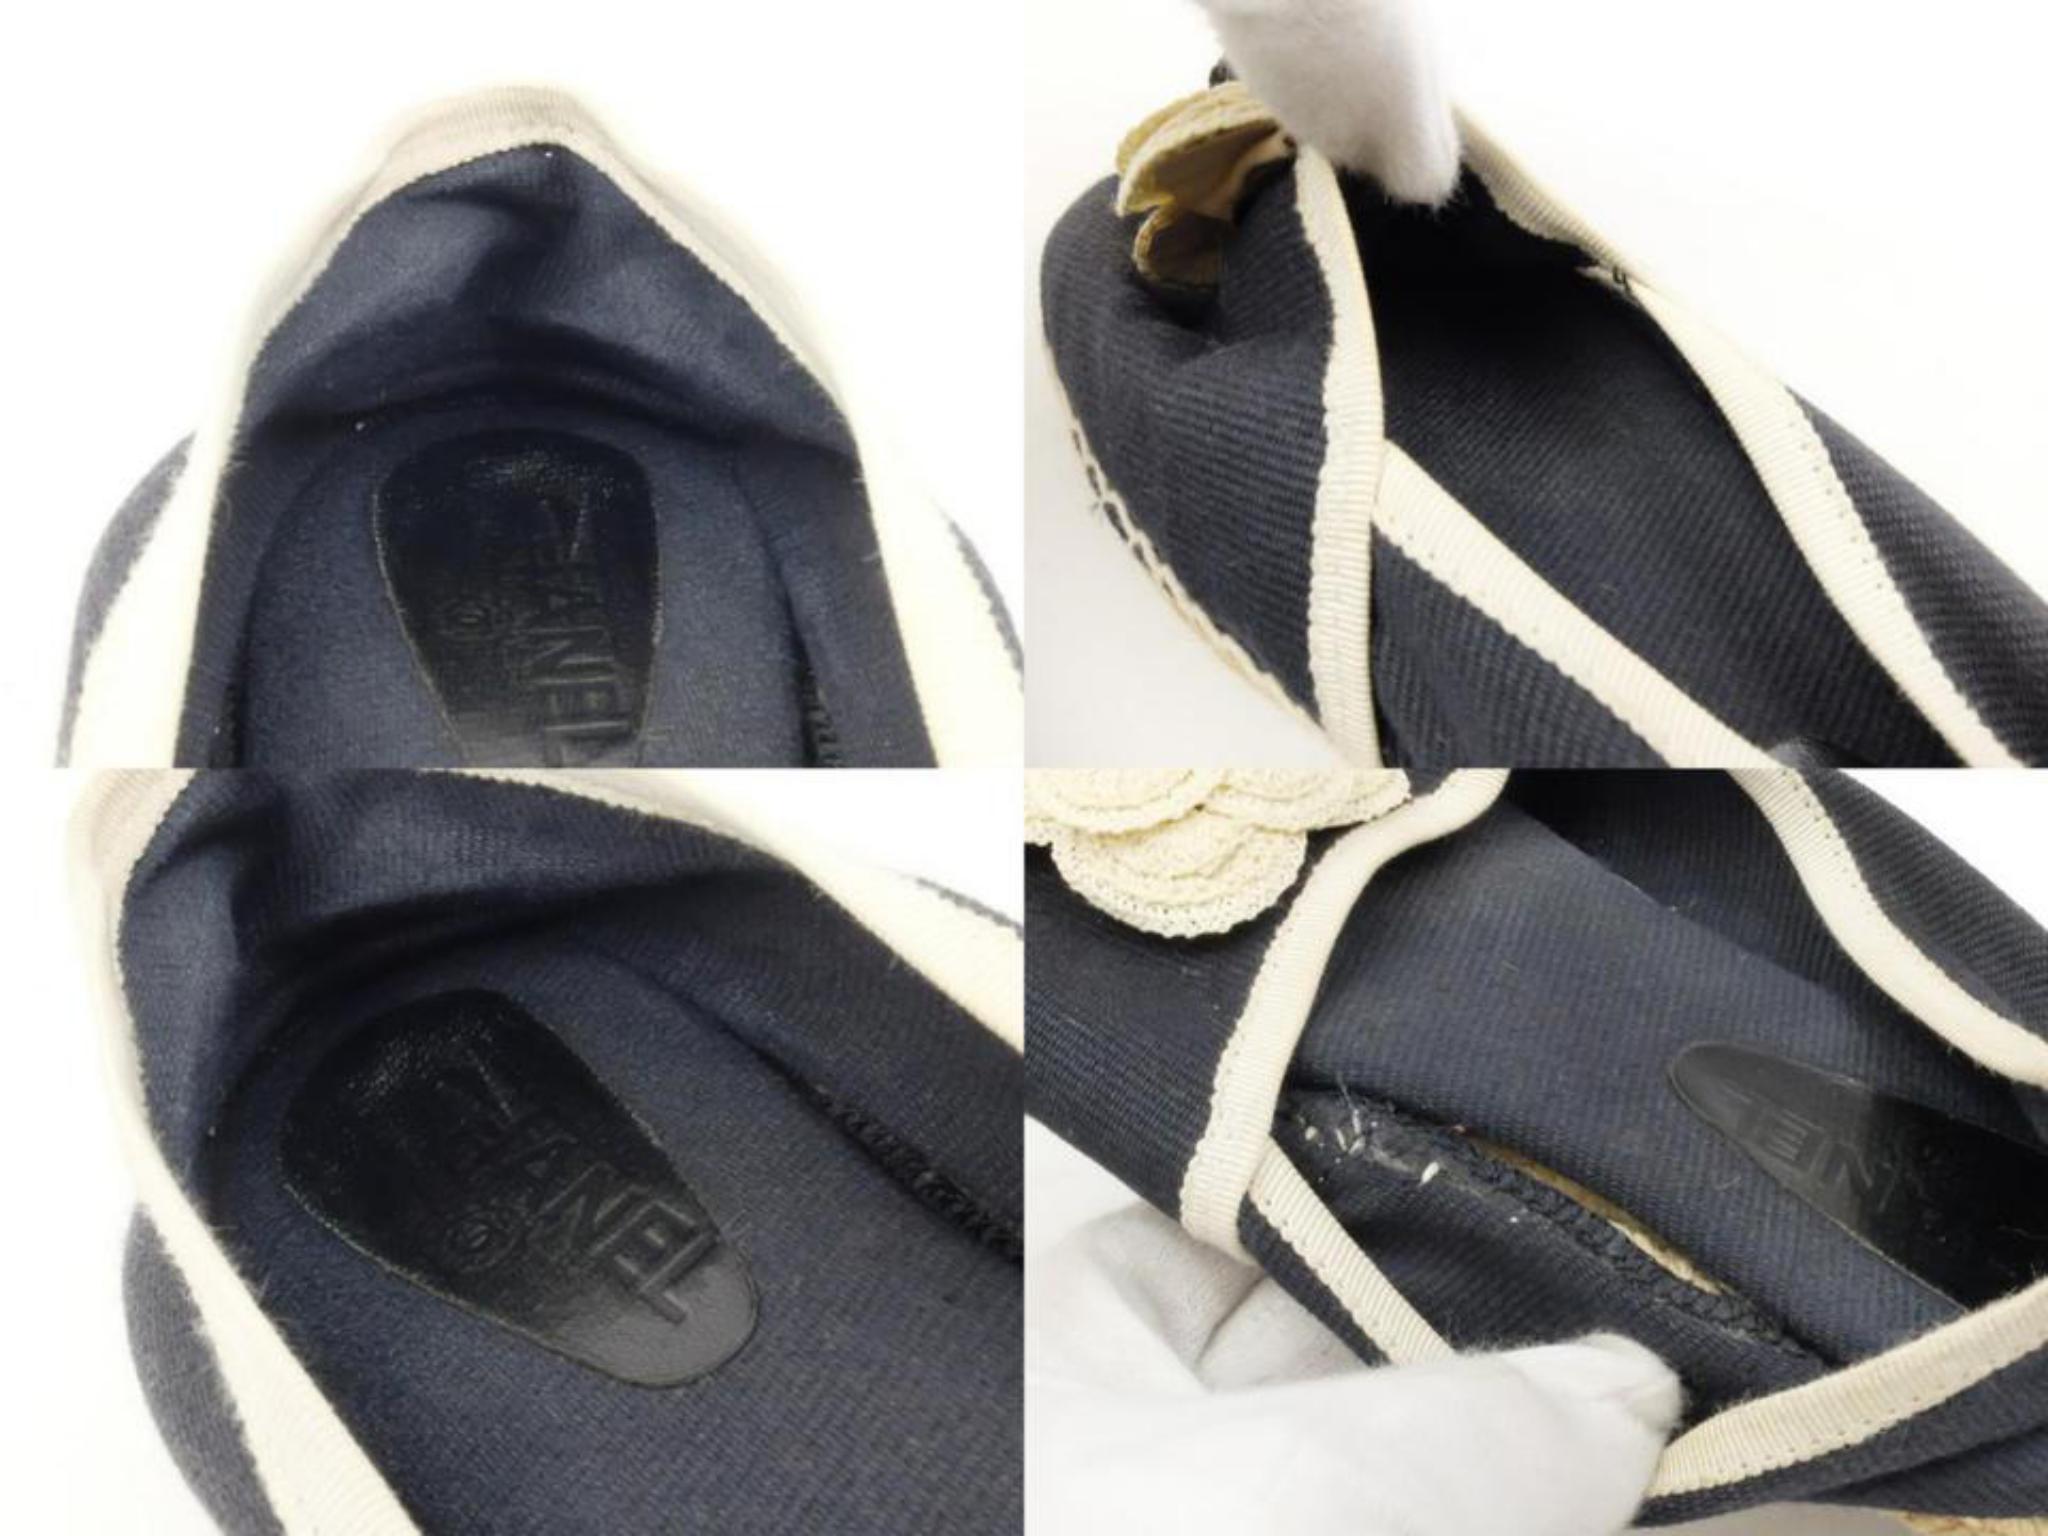 Chanel Navy Camellia Espadrille 226696 Flats In Good Condition For Sale In Forest Hills, NY